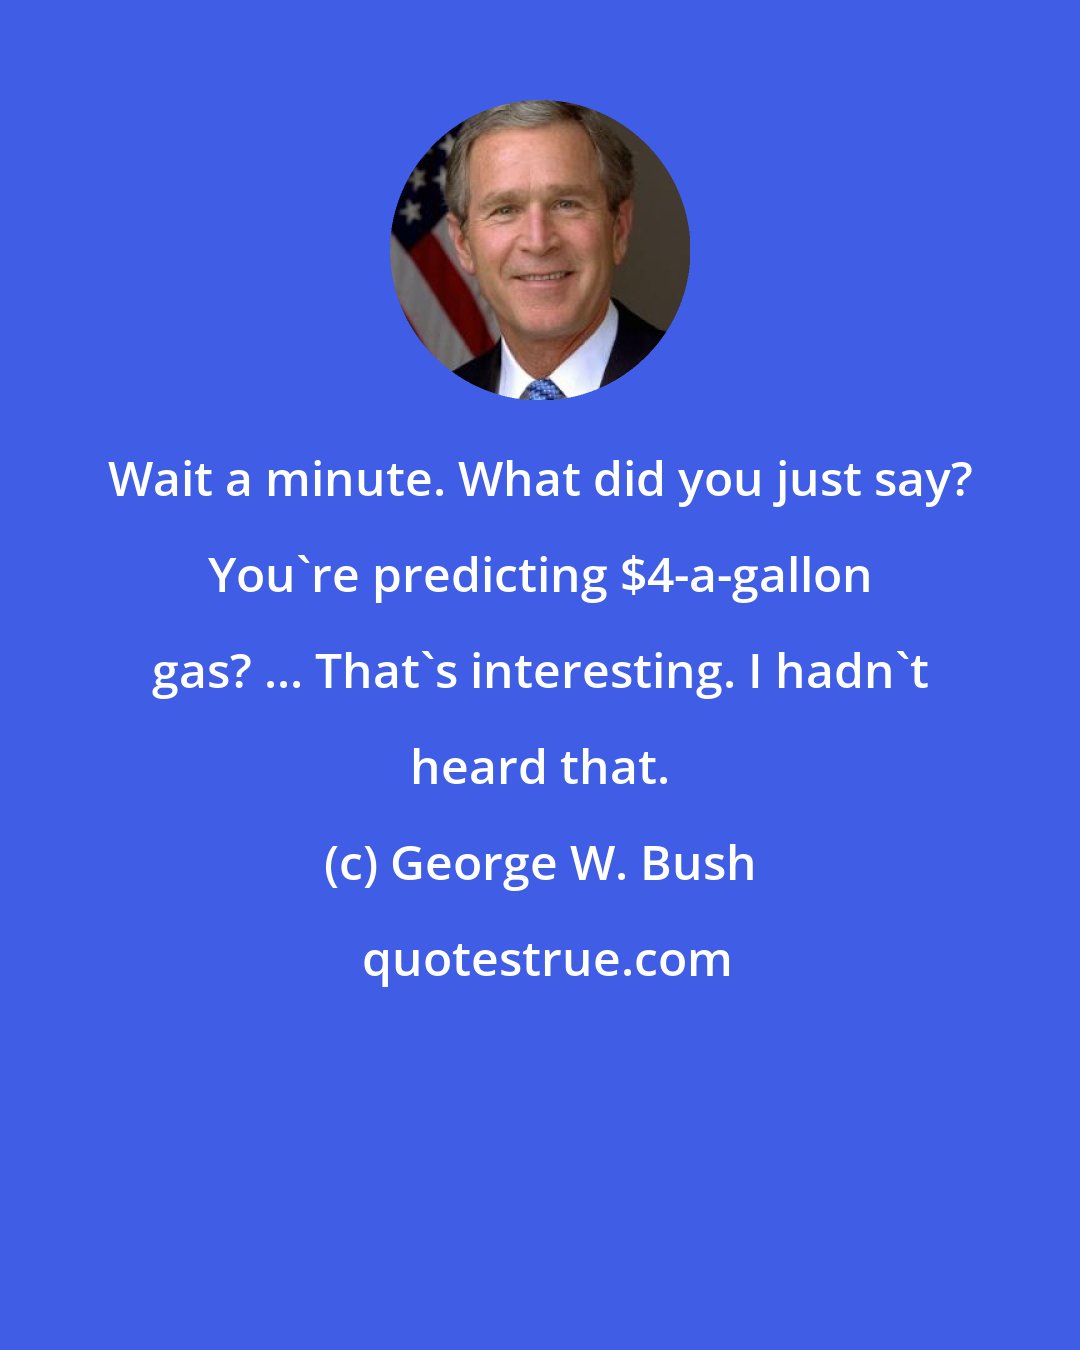 George W. Bush: Wait a minute. What did you just say? You're predicting $4-a-gallon gas? ... That's interesting. I hadn't heard that.